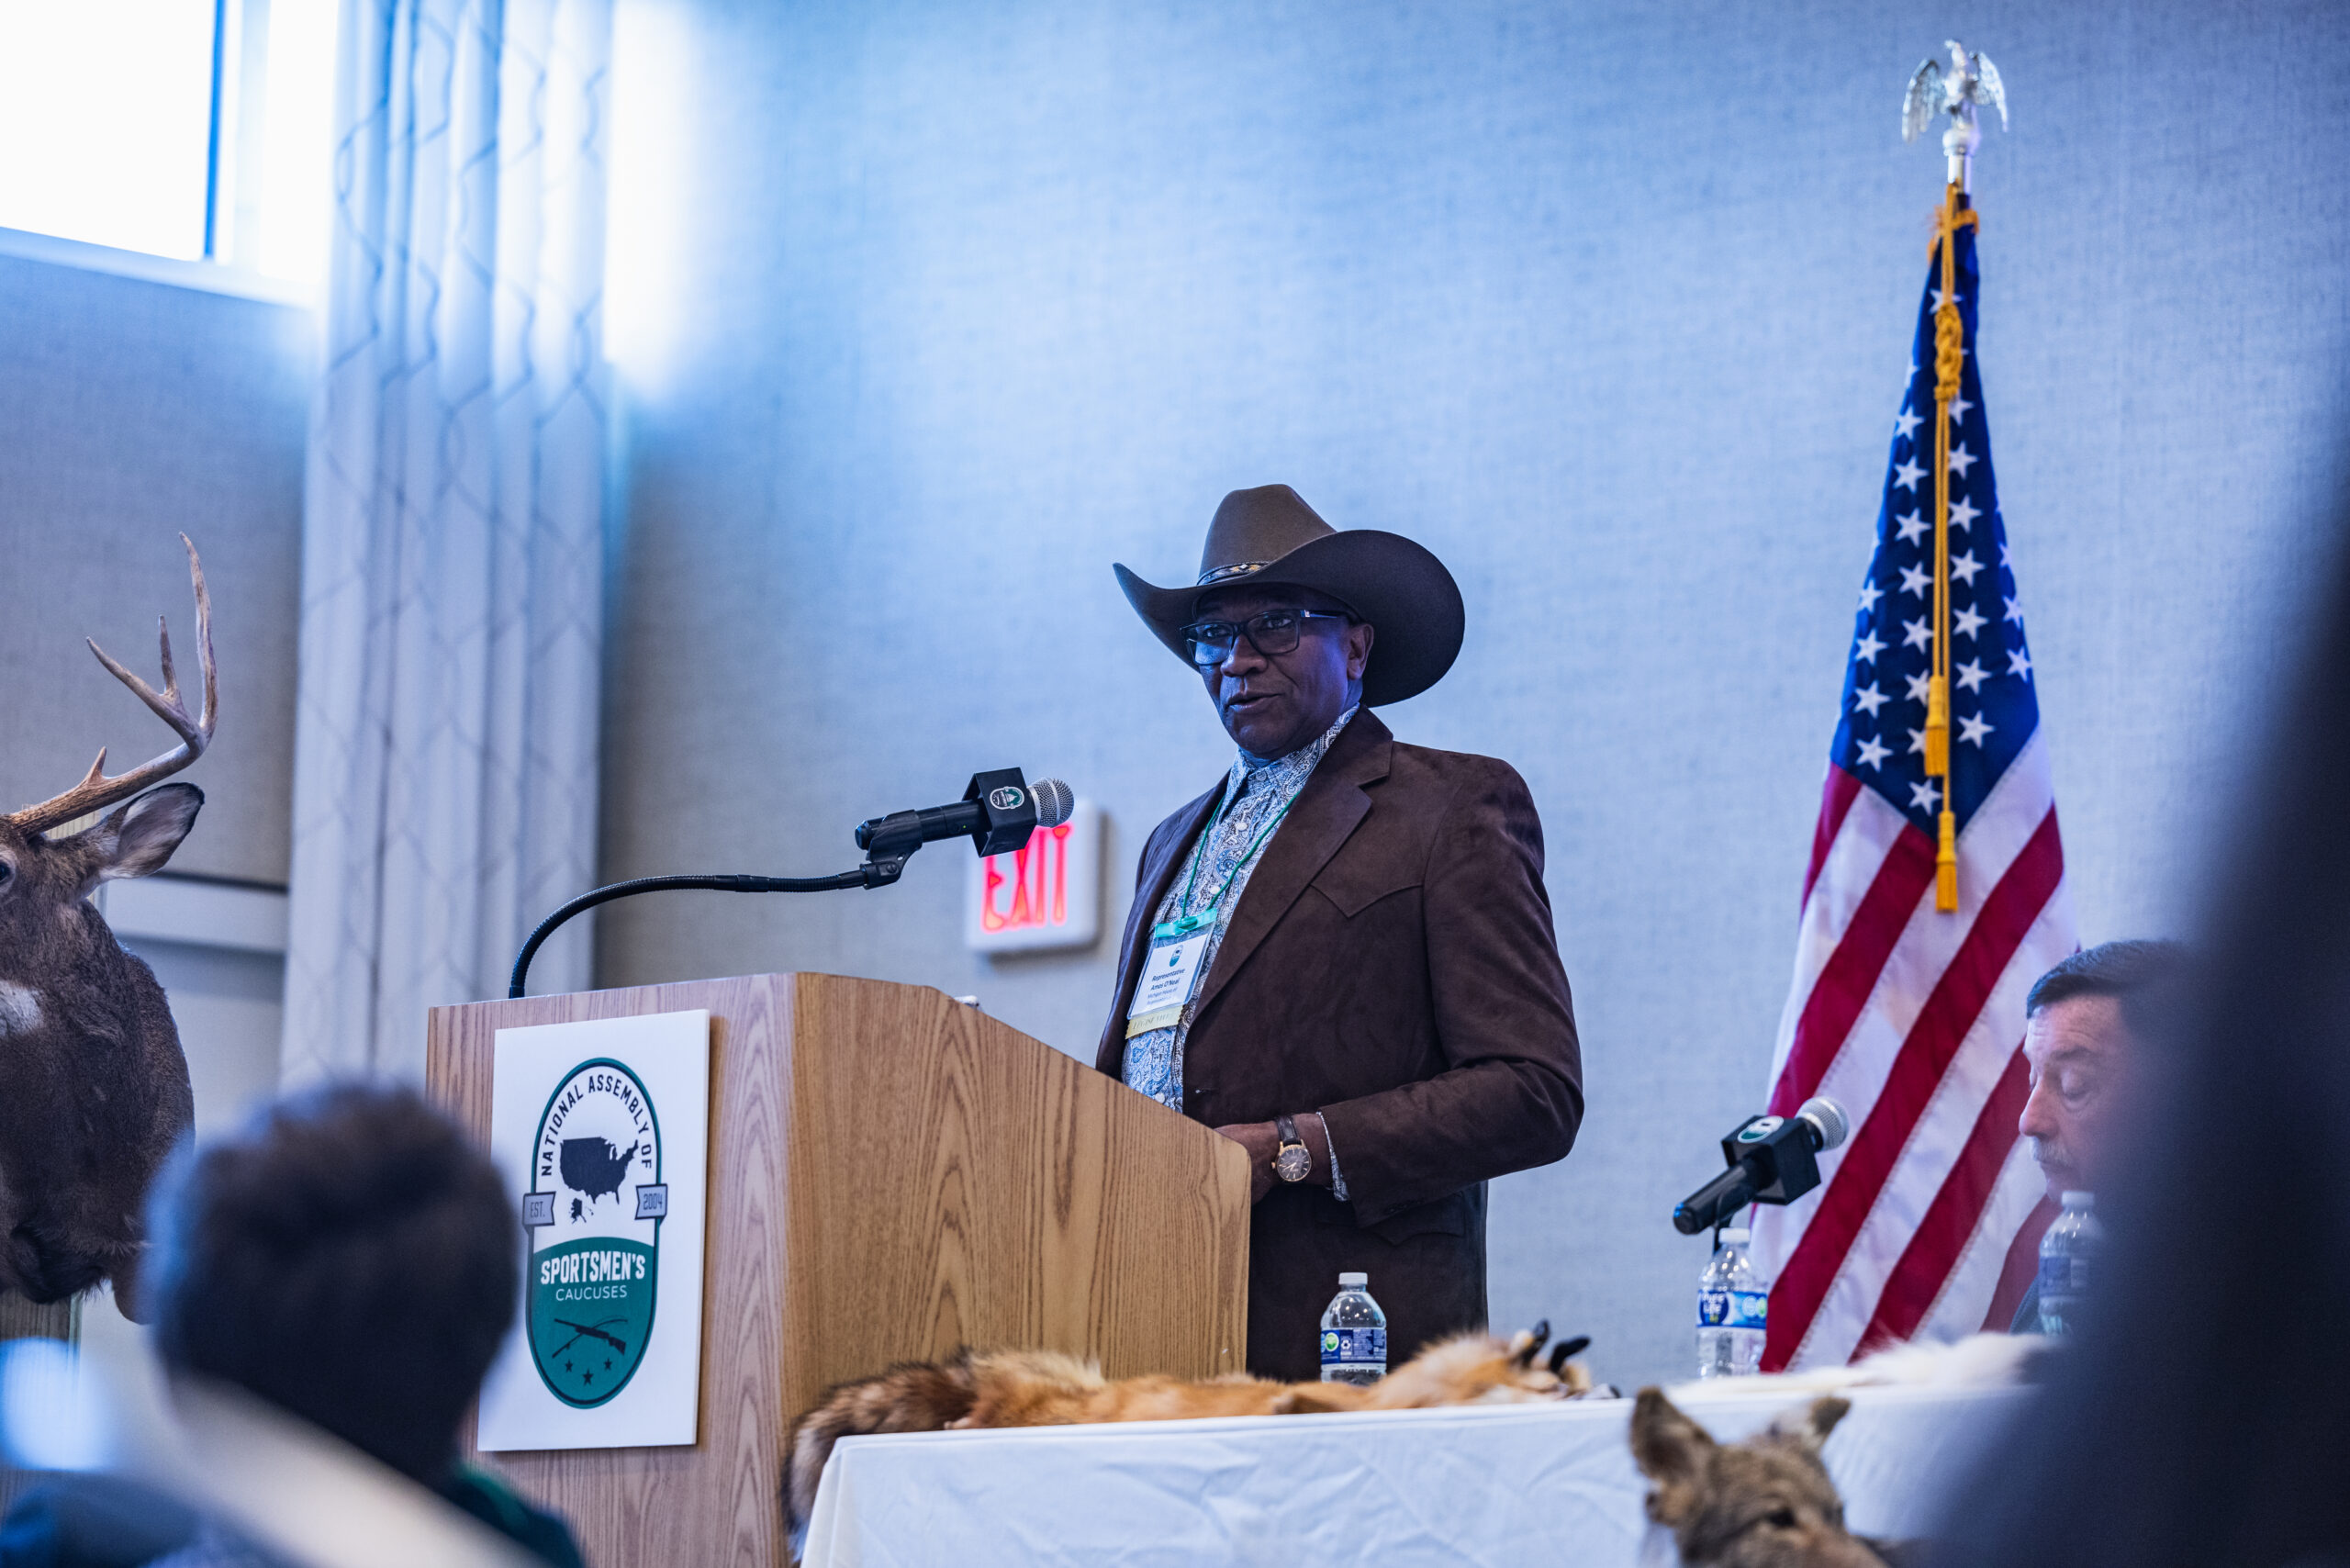 State Rep. Amos O’Neal (D-Saginaw) addresses the crowd for his candidacy to the National Assembly of Sportsmen’s Caucuses’ Executive Council at the 20th annual NASC Summit in Dewey Beach, Del., on Dec. 6, 2023.